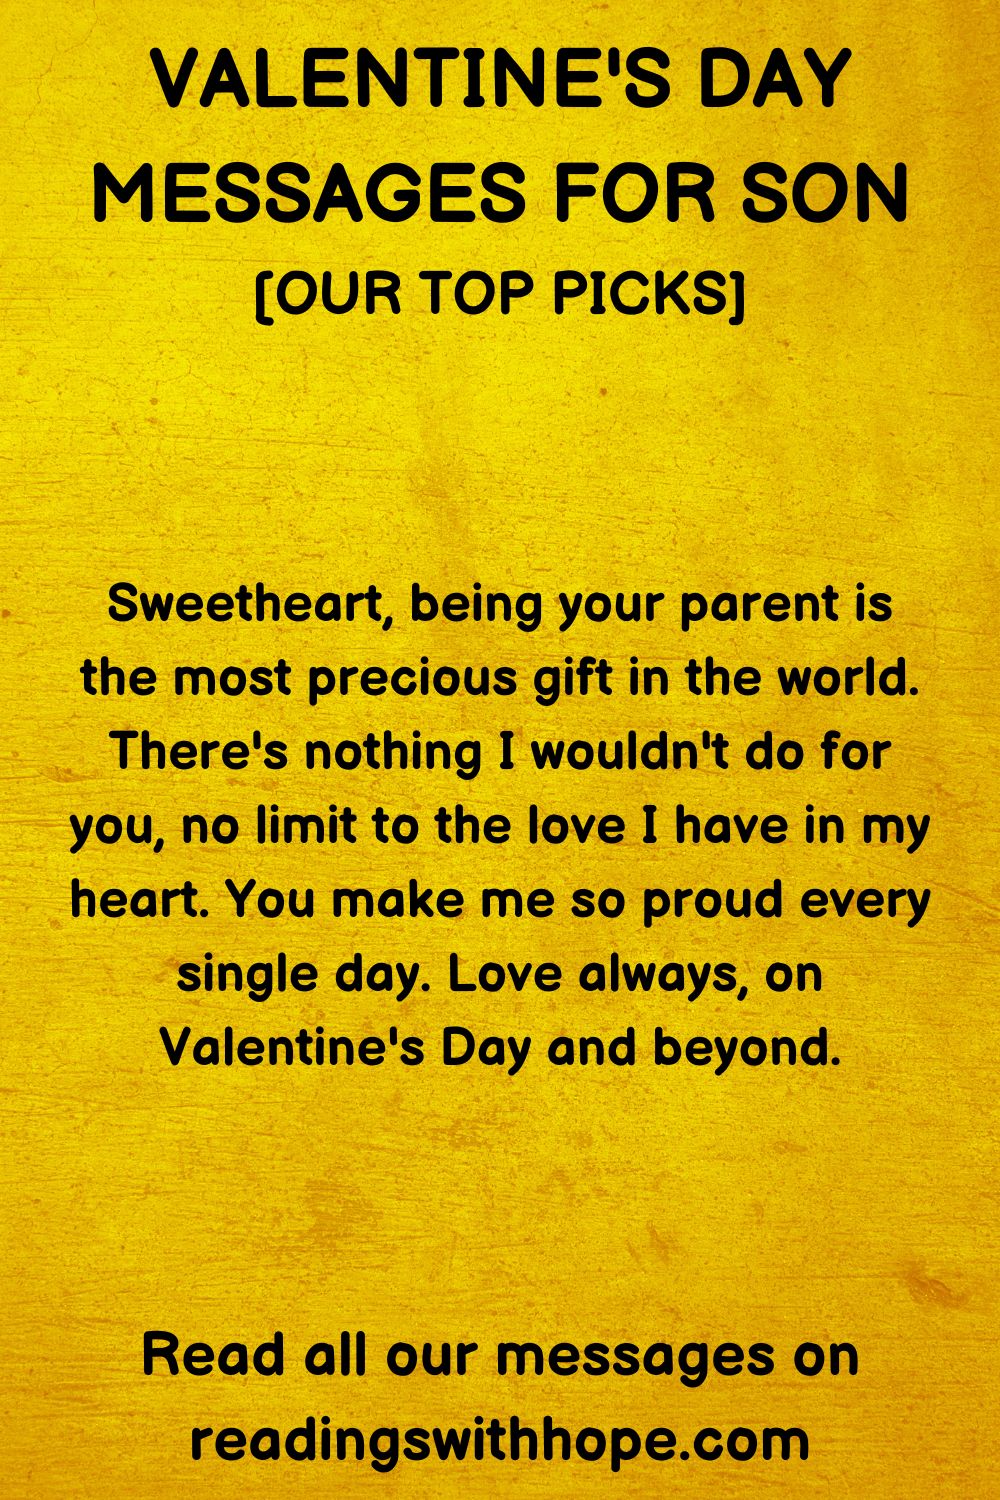 45 Valentine's Day Messages for Your Son